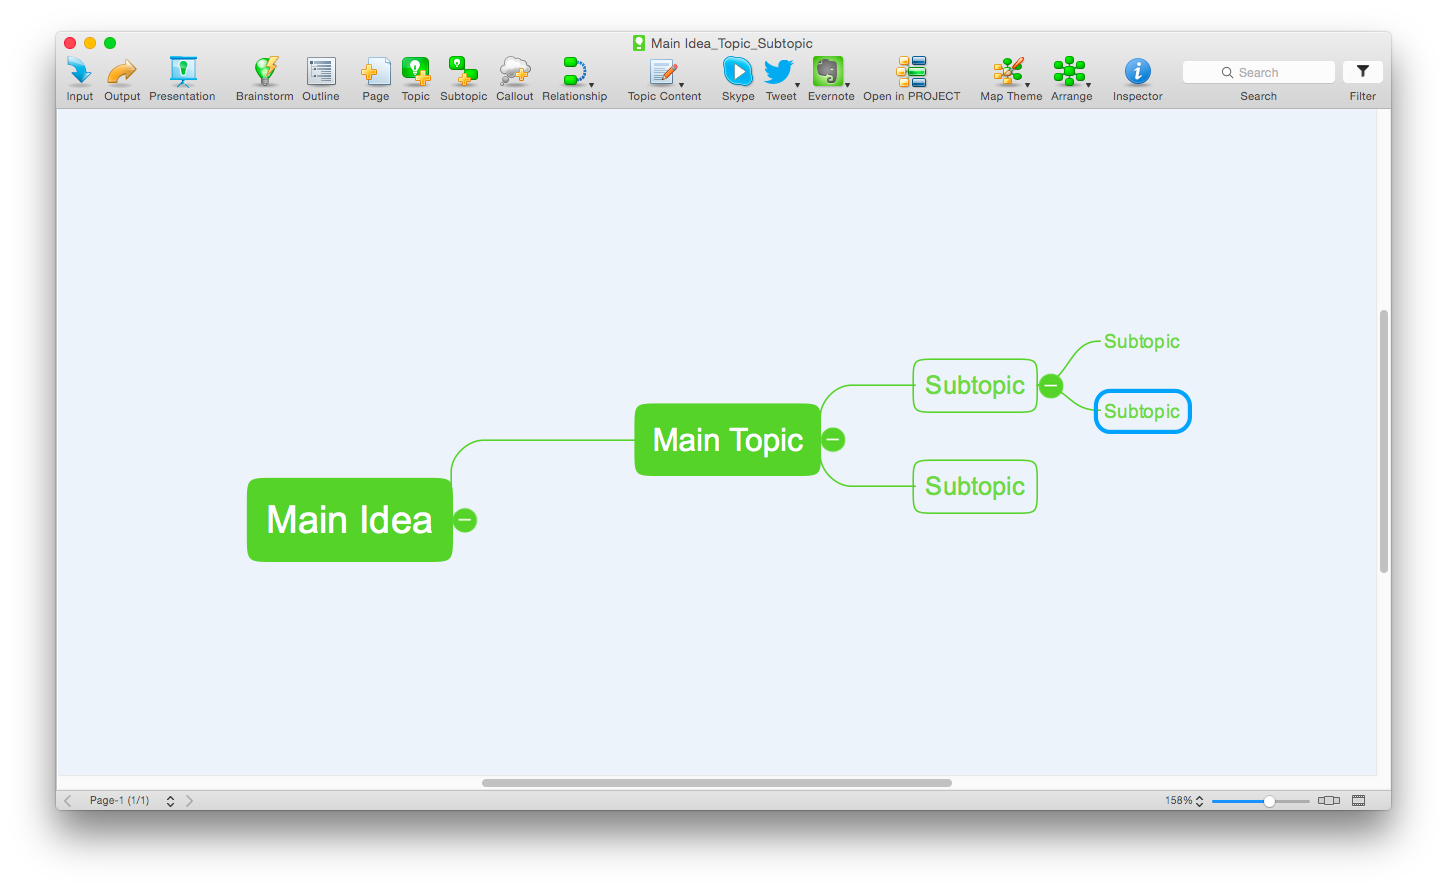 Concept Draw Office 10.0.0.0 + MINDMAP 15.0.0.275 free downloads